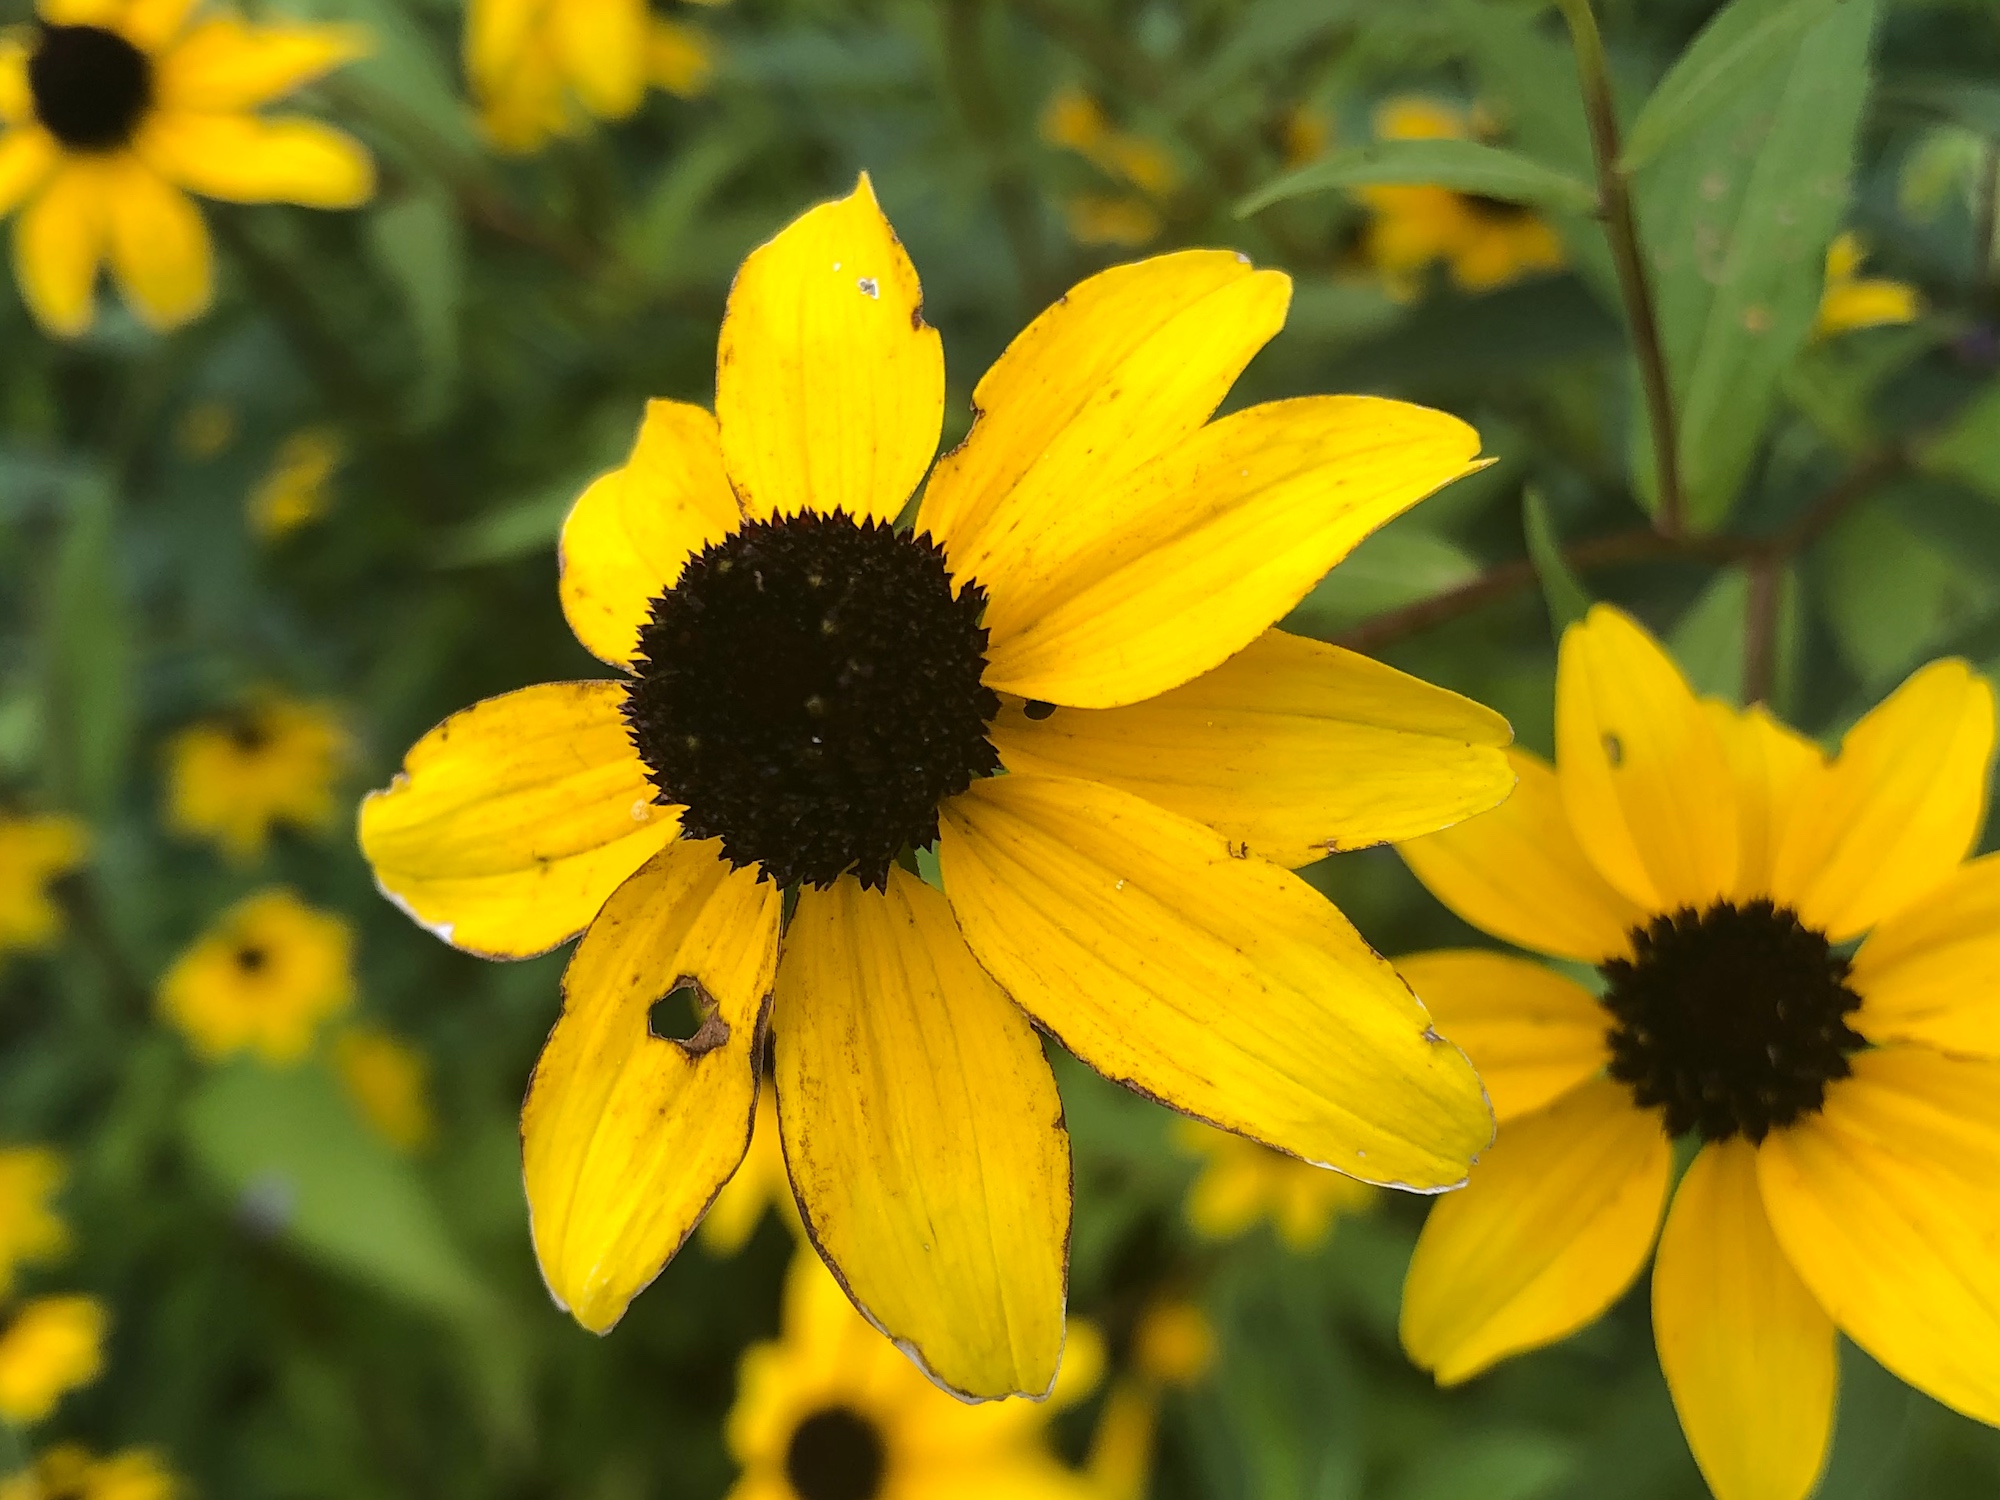 Brown-eyed Susan on banks of retaining pond in Madison, Wisconsin on August 11, 2019.